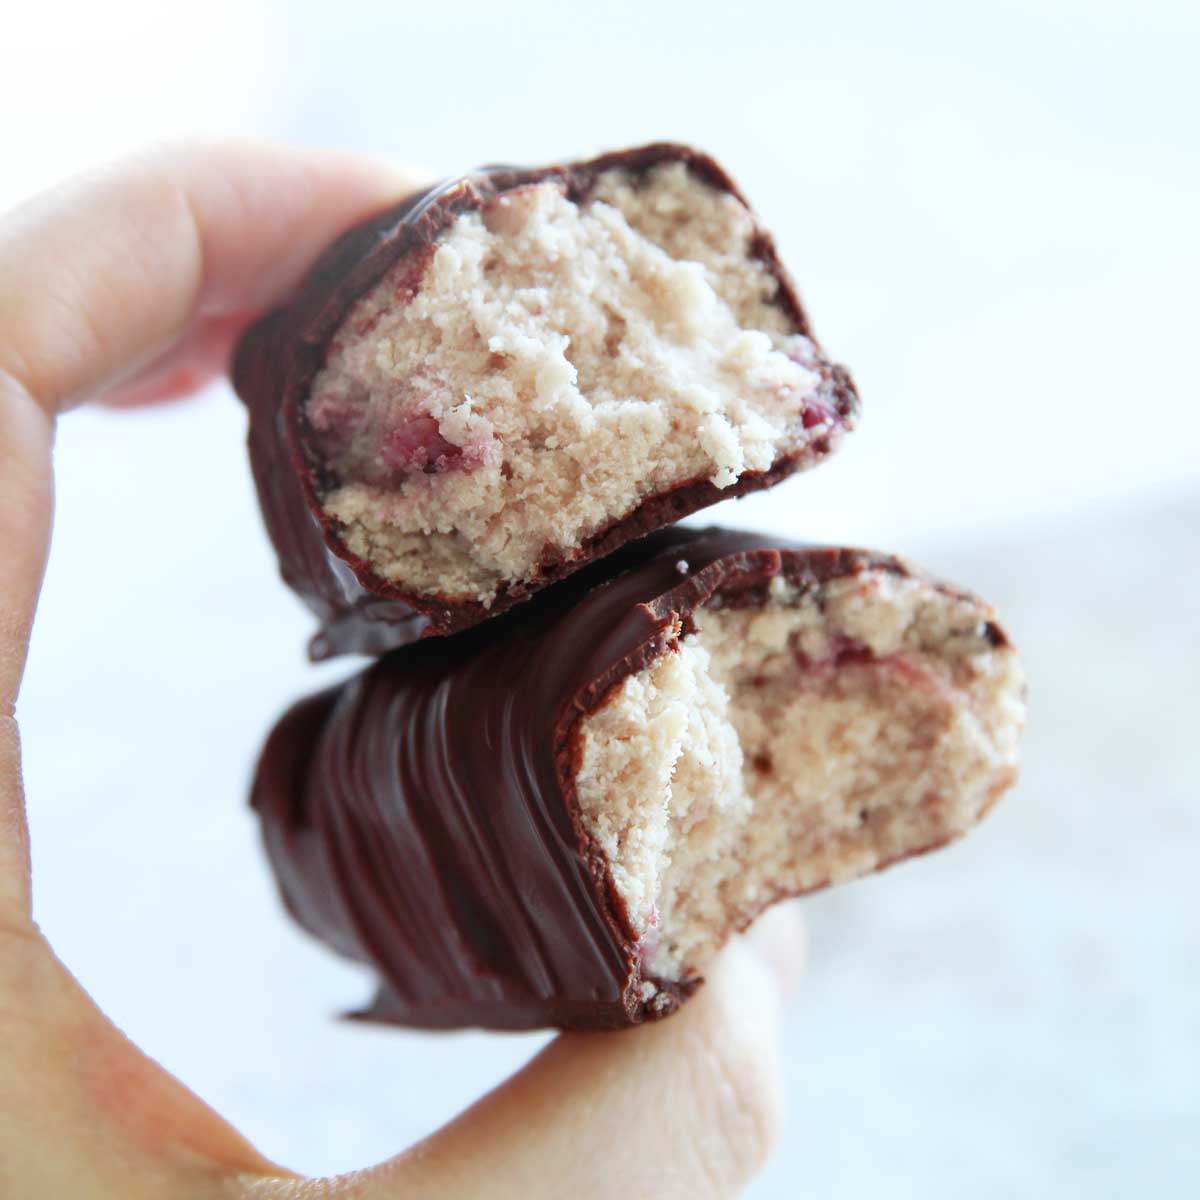 Blueberry Cheesecake Protein Balls Recipe (Healthy Low Carb Energy Bites) - protein balls